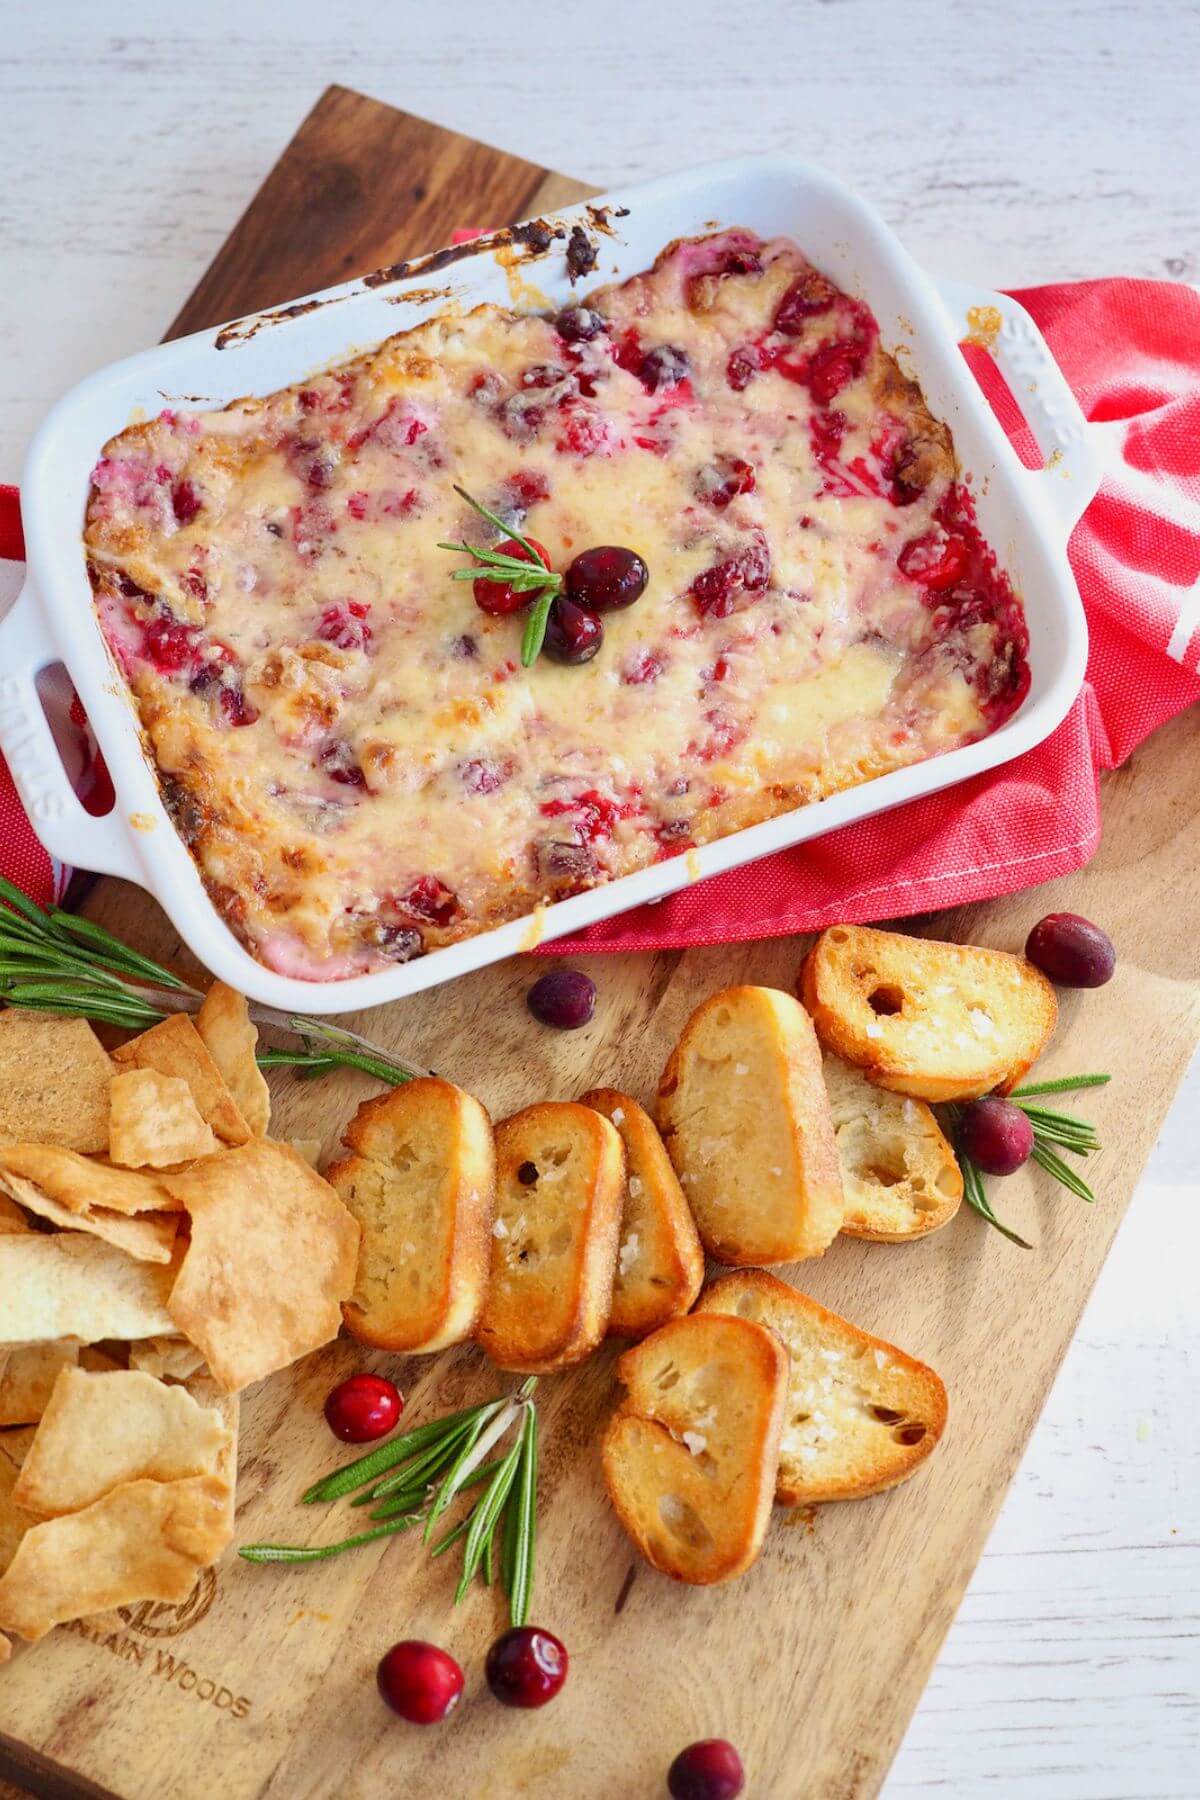 Cream cheese cranberry hot dip on board with crostini and pita chips.